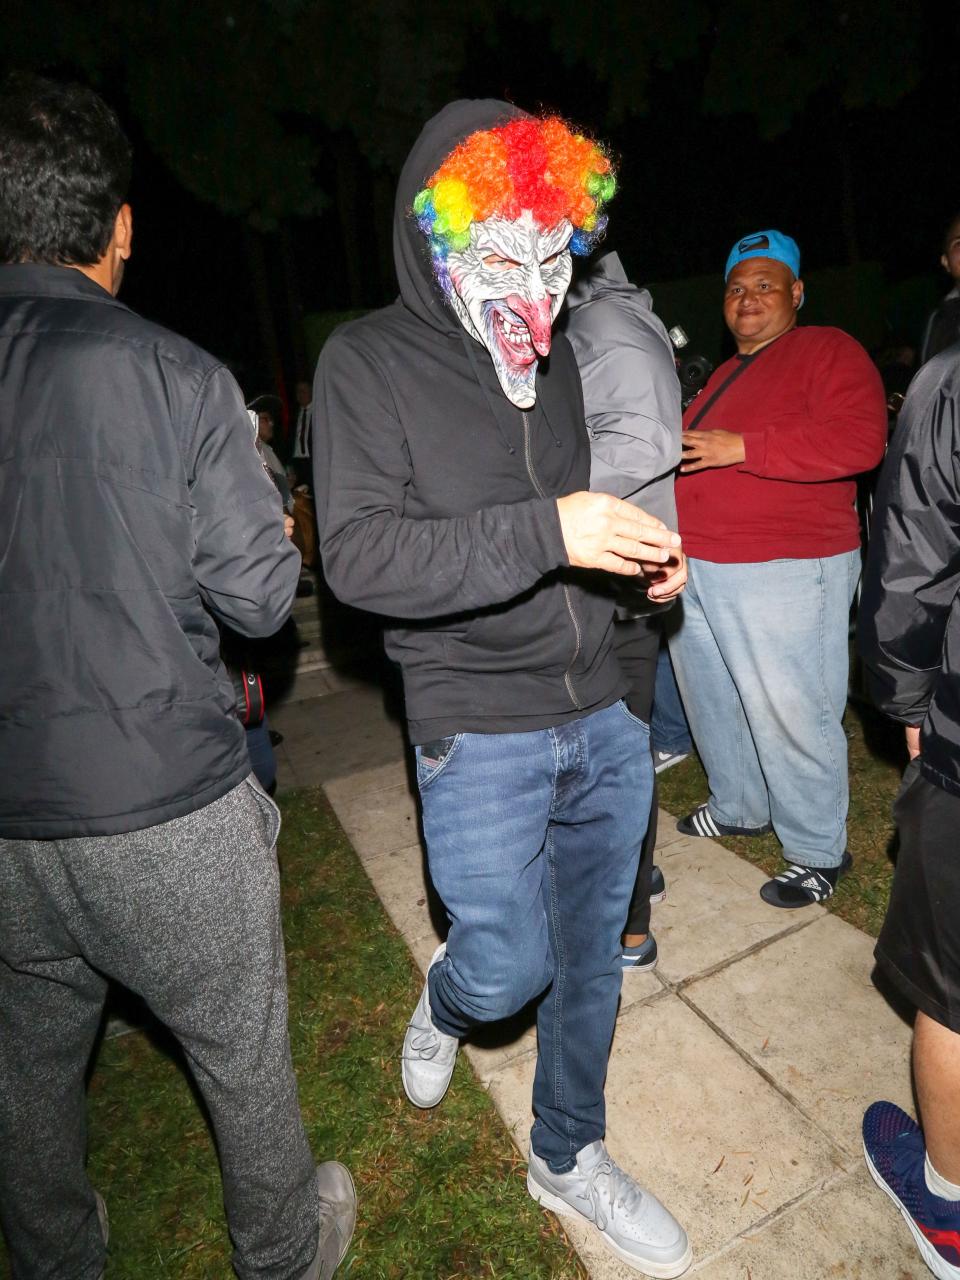 Leonardo DiCaprio, wearing a truly frightening Halloween mask, in 2018.